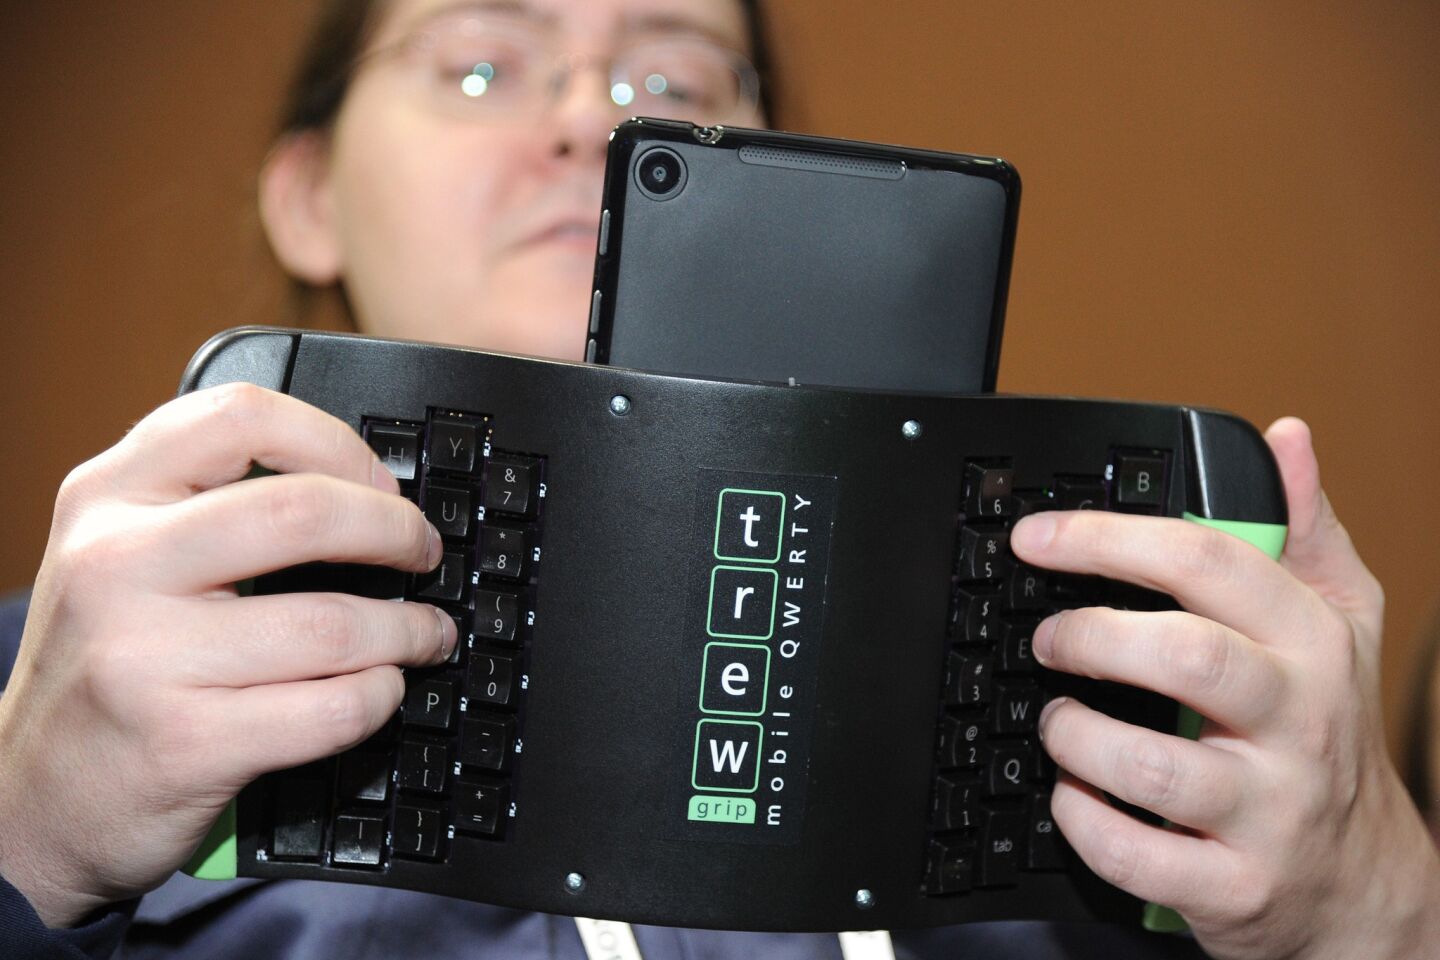 Robert Price of TREWGrip LLC demonstrates a TREWGrip handheld rear-type keyboard and air mouse for Apple and Android tablets at the "CES: Unveiled" media preview.